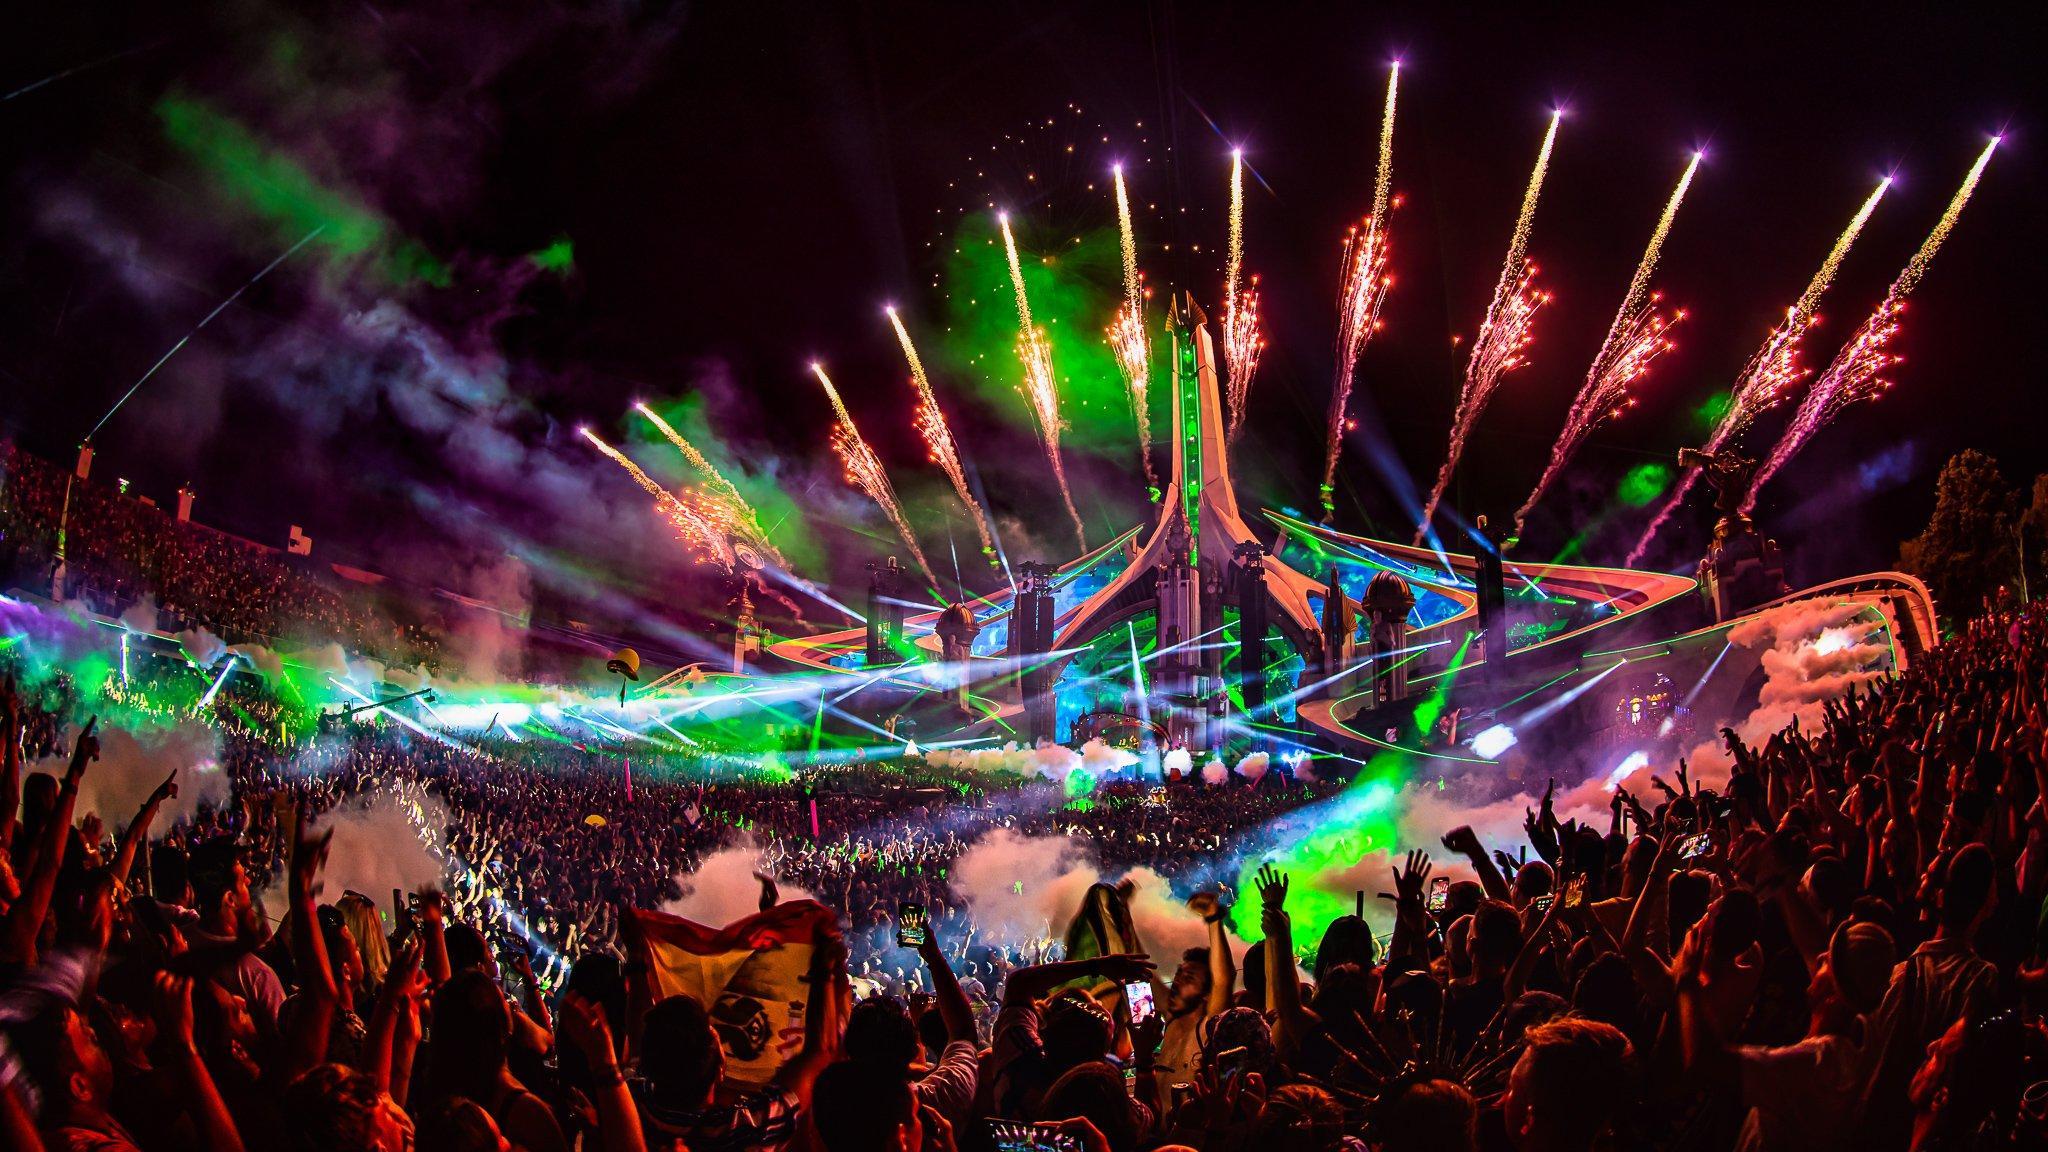 Tomorrowland Returns to Claim the Festival Crown Once Again